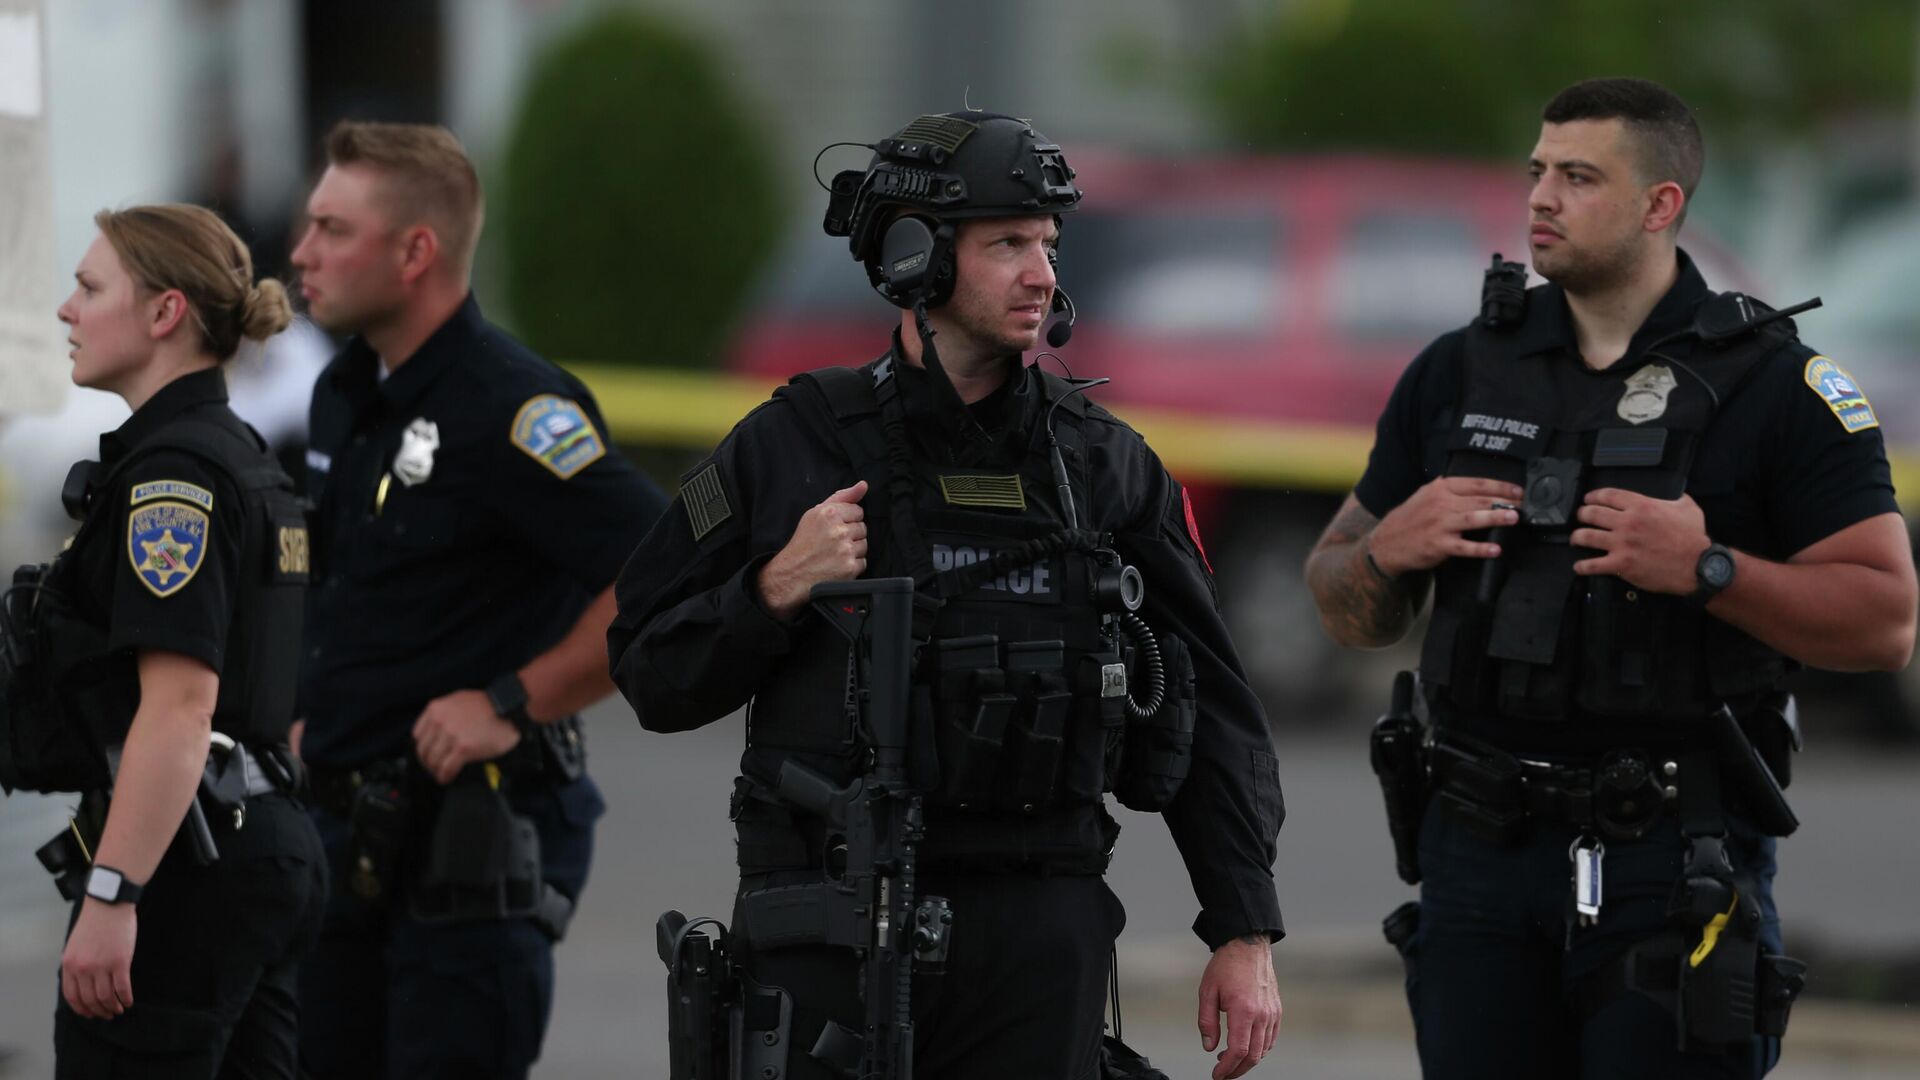 Police walk along the perimeter of the scene after a shooting at a supermarket on Saturday, May 14, 2022, in Buffalo, N.Y.  Officials said the gunman entered the supermarket with a rifle and opened fire. Investigators believe the man may have been livestreaming the shooting and were looking into whether he had posted a manifesto online.  - Sputnik International, 1920, 17.05.2022